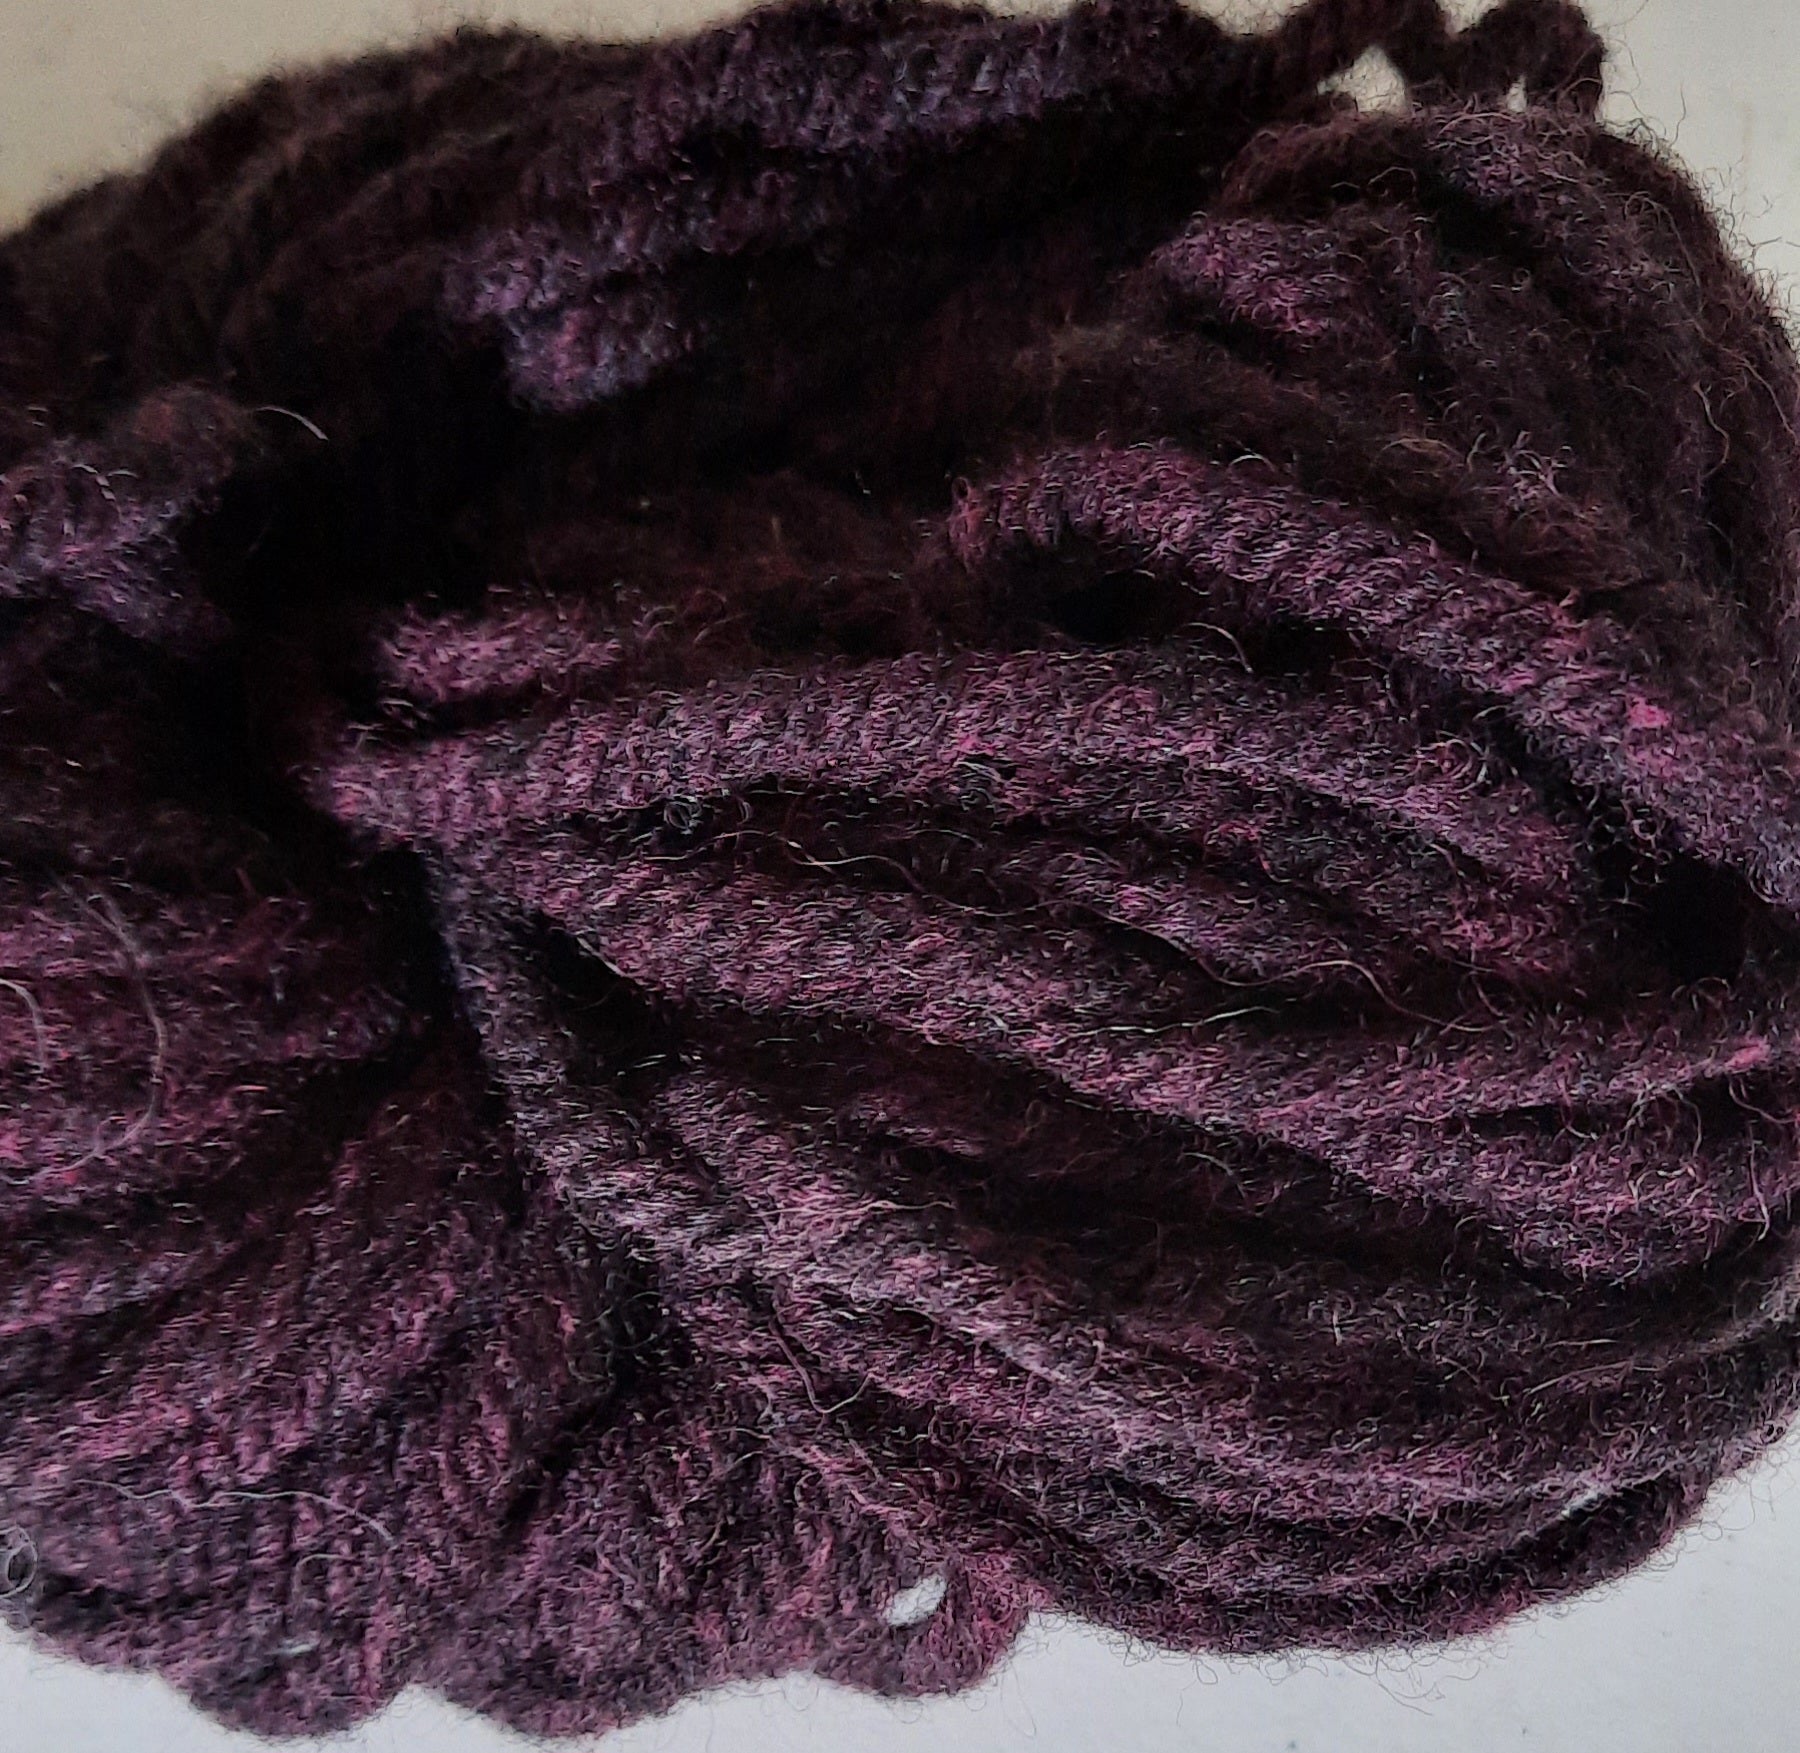 New! Hand-Dyed Super Bulky  (4 ply) Yarn - Eggplant